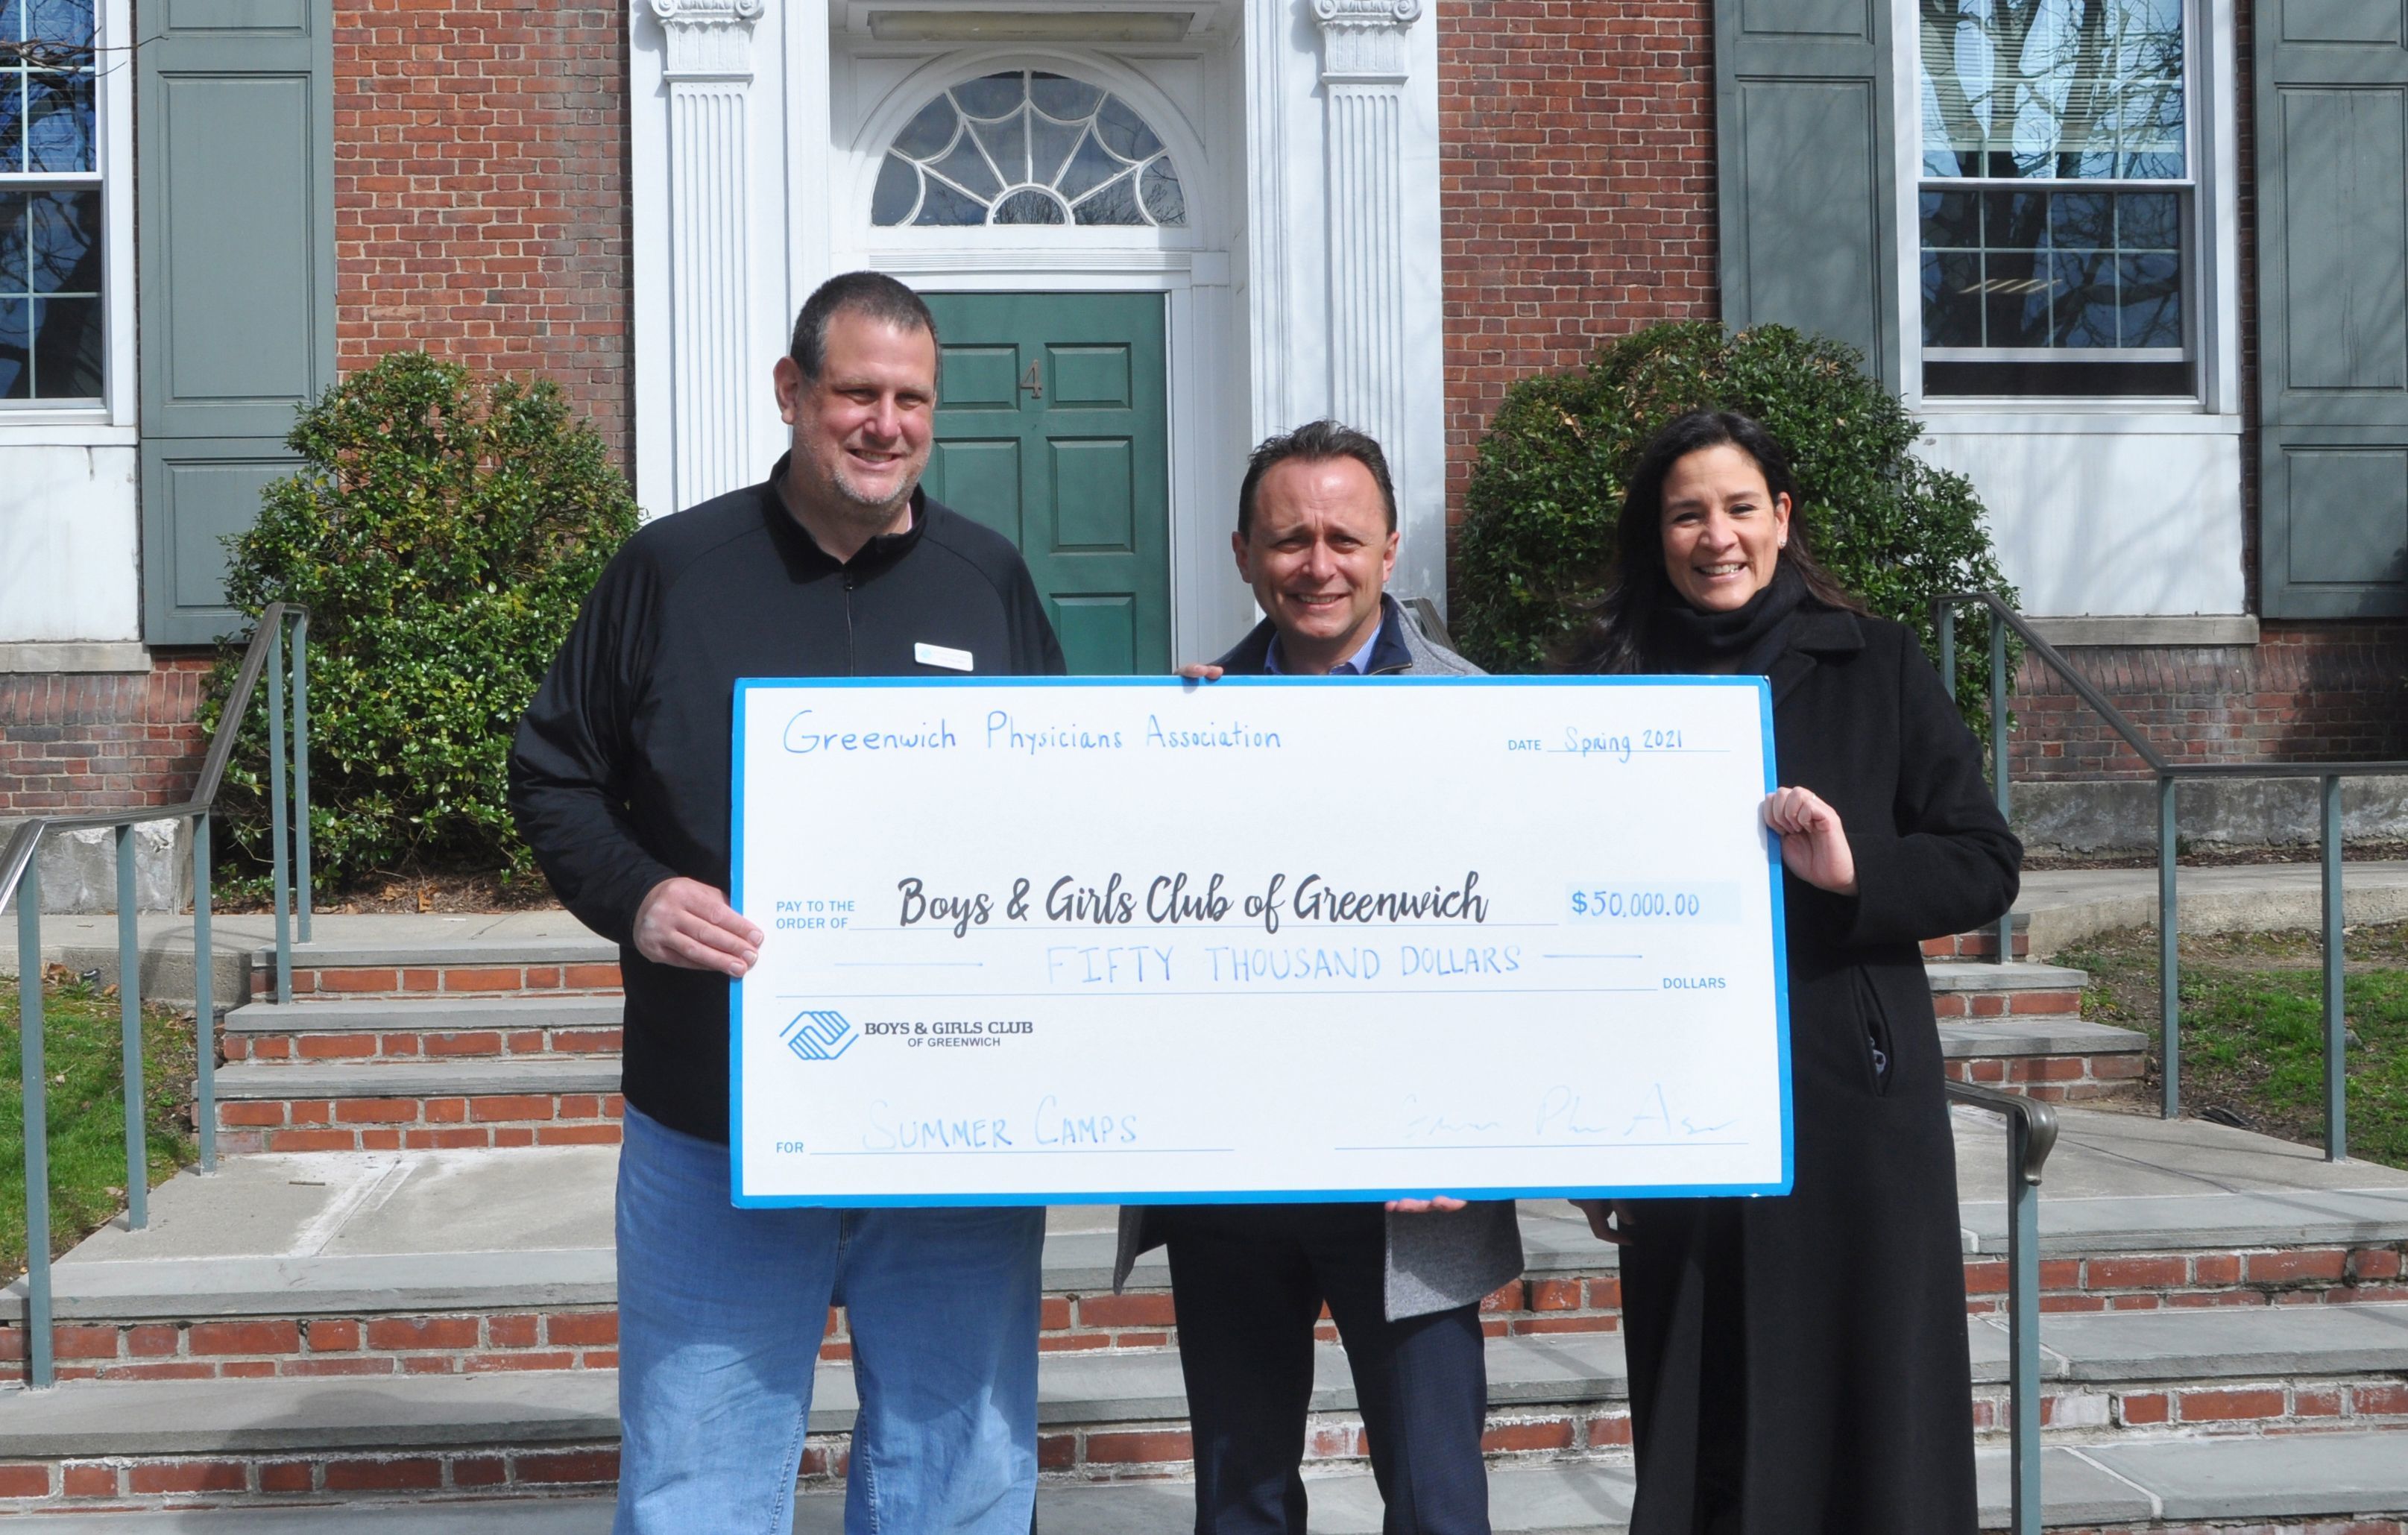 BGCG Receives $50,000 Donation from Greenwich Physicians Association